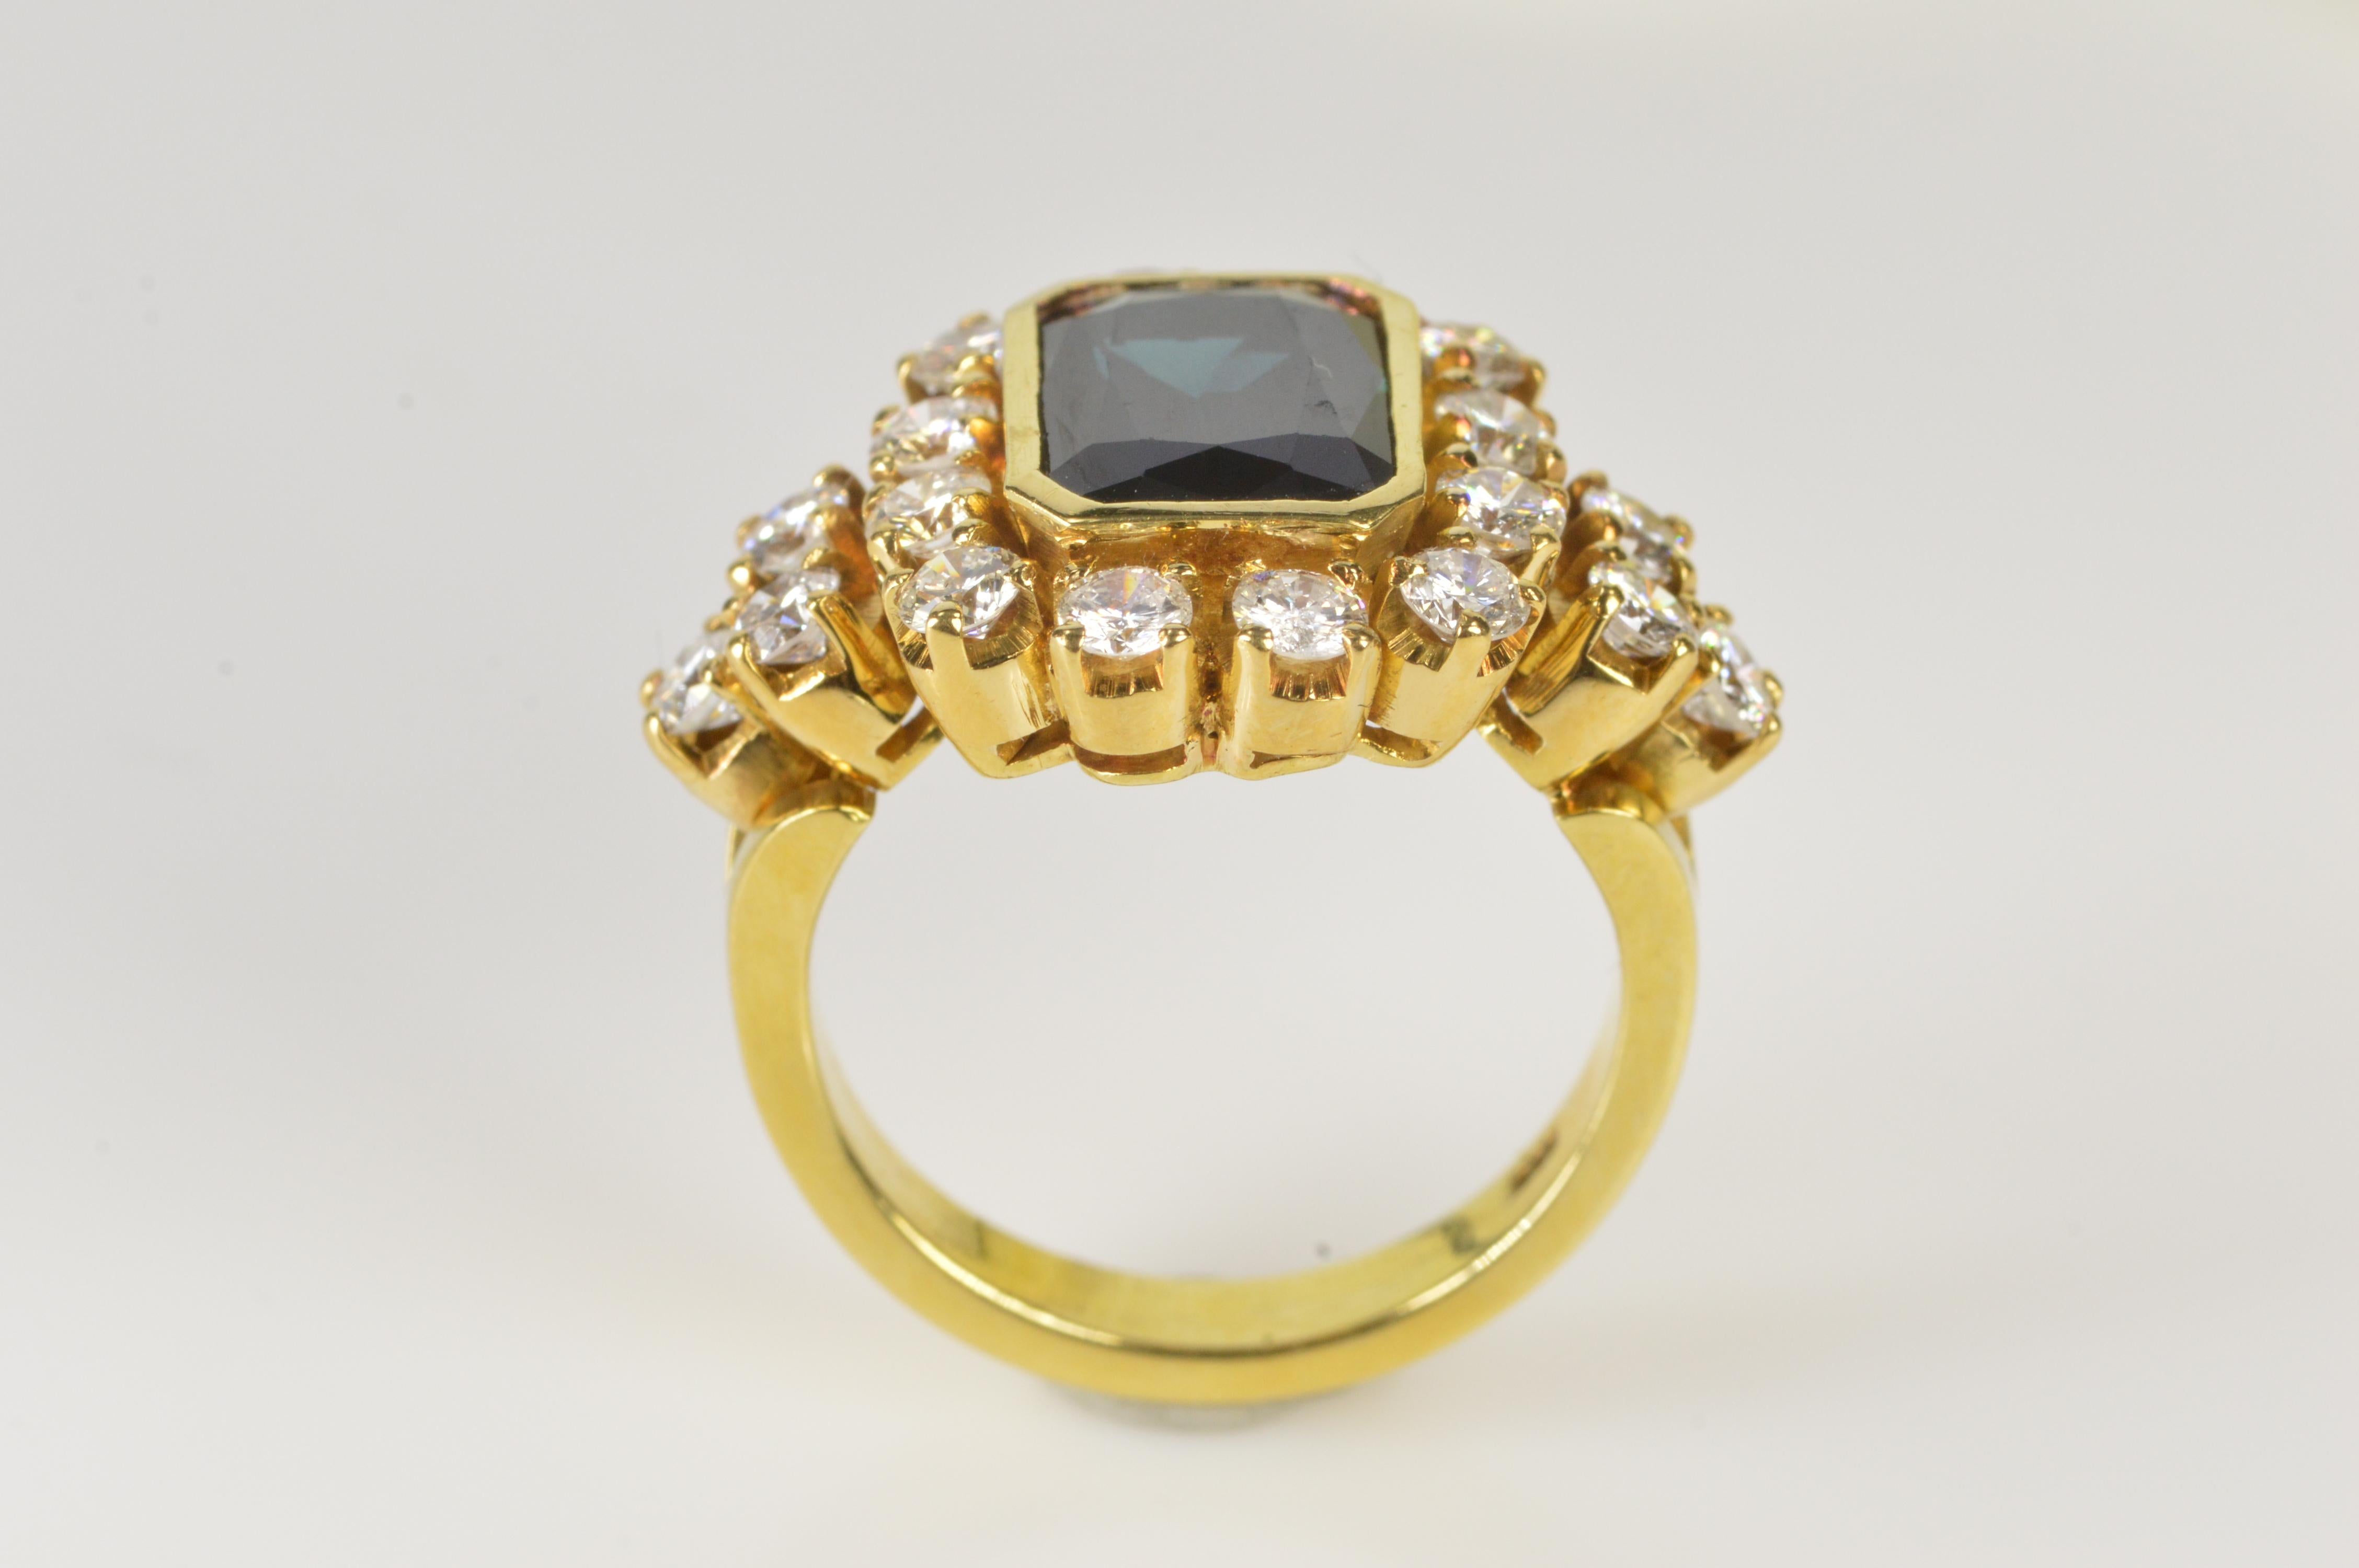 ·Item: 18K 4.00 CW Sapphire 1.80 Ctw Diamond Statement Ring Size 7.5 Yellow Gold  

·Era: Vintage / 1950s  ·Composition: 18k Gold Marked/Tested  

·Center Gem Stone: 4.00 Ct Sapphire  

·Gem Stone: 18x Diamonds=1.80Ctw G/VS-SI  

·Weight: 10.6g